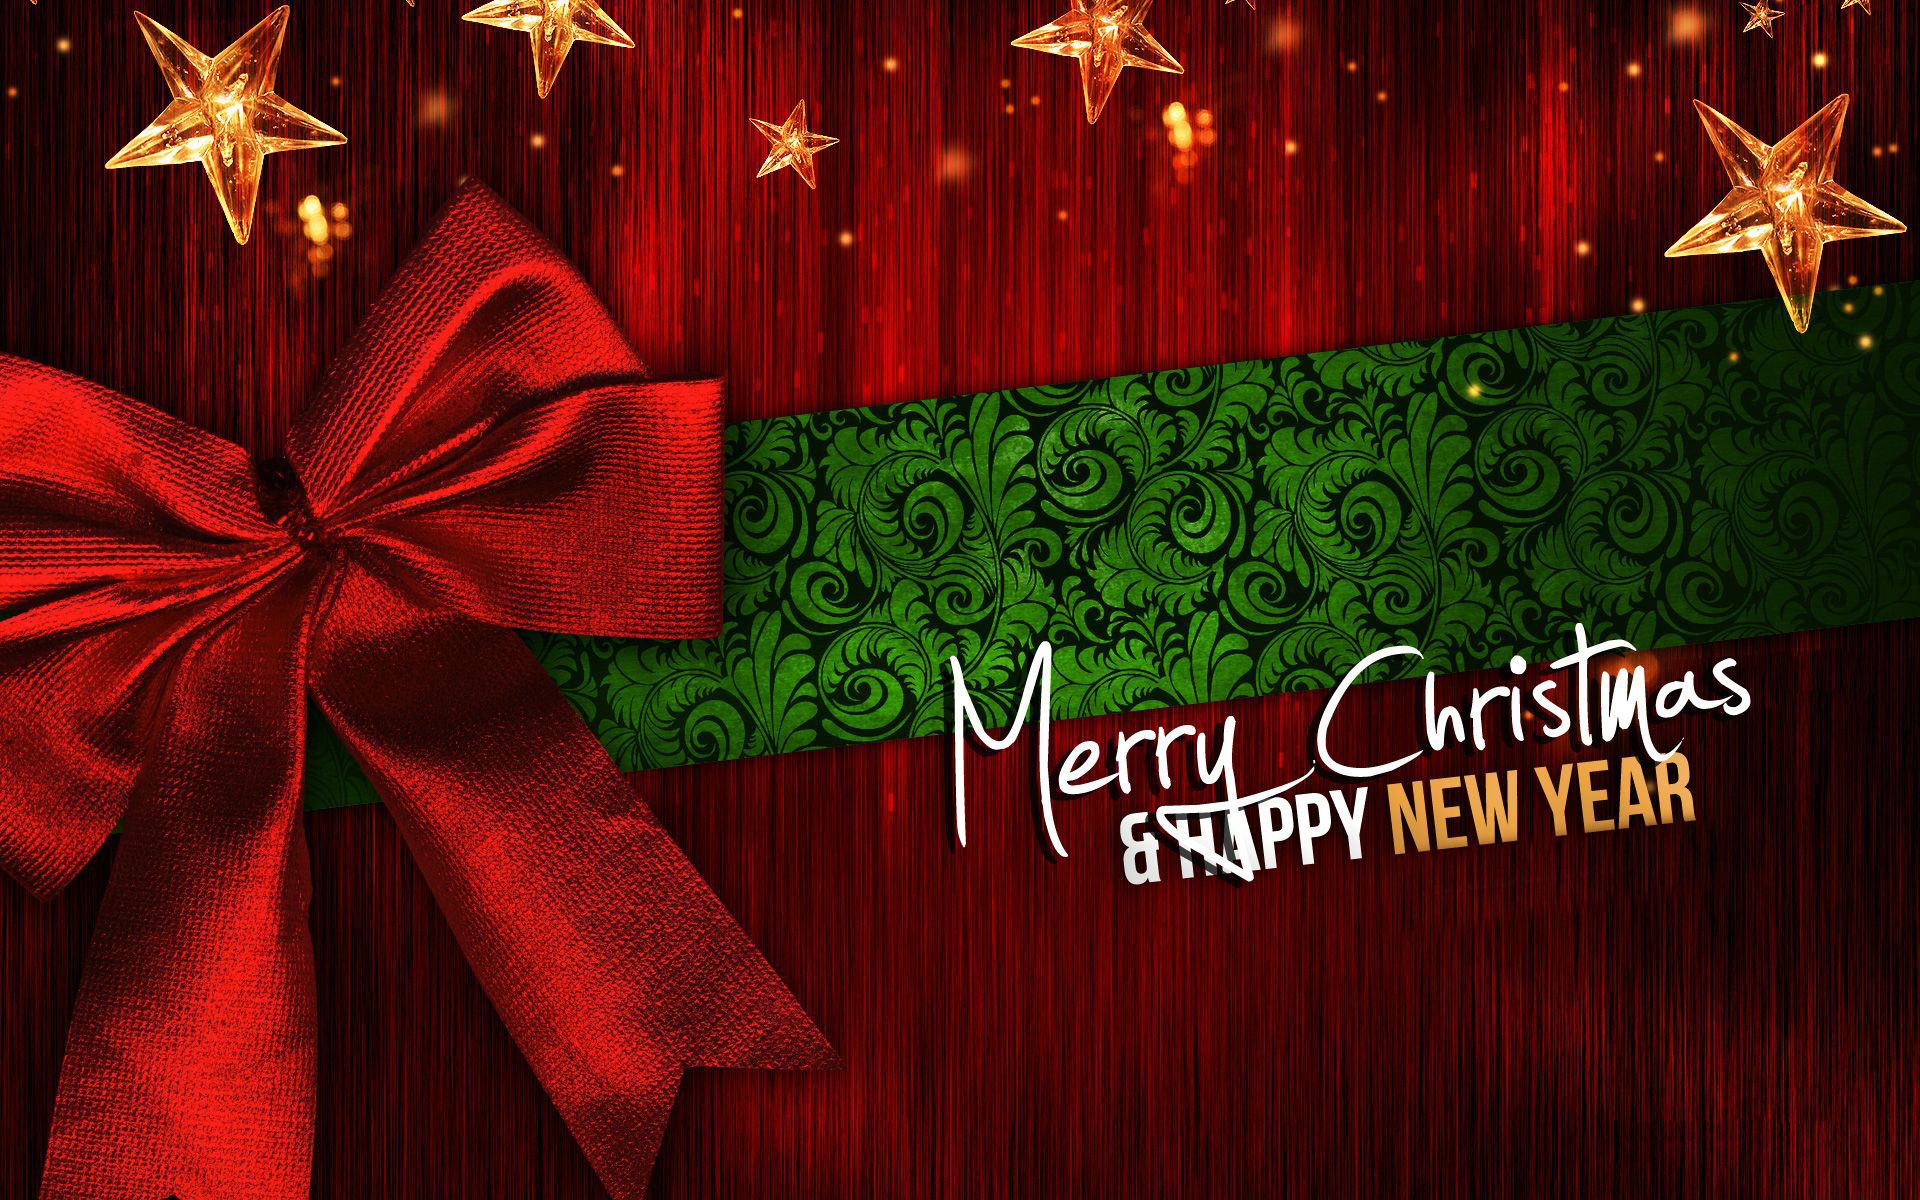 1920x1200 Merry Christmas and Happy New Year HD Wallpaper Background Desktop  Screensaver PC Laptop ...